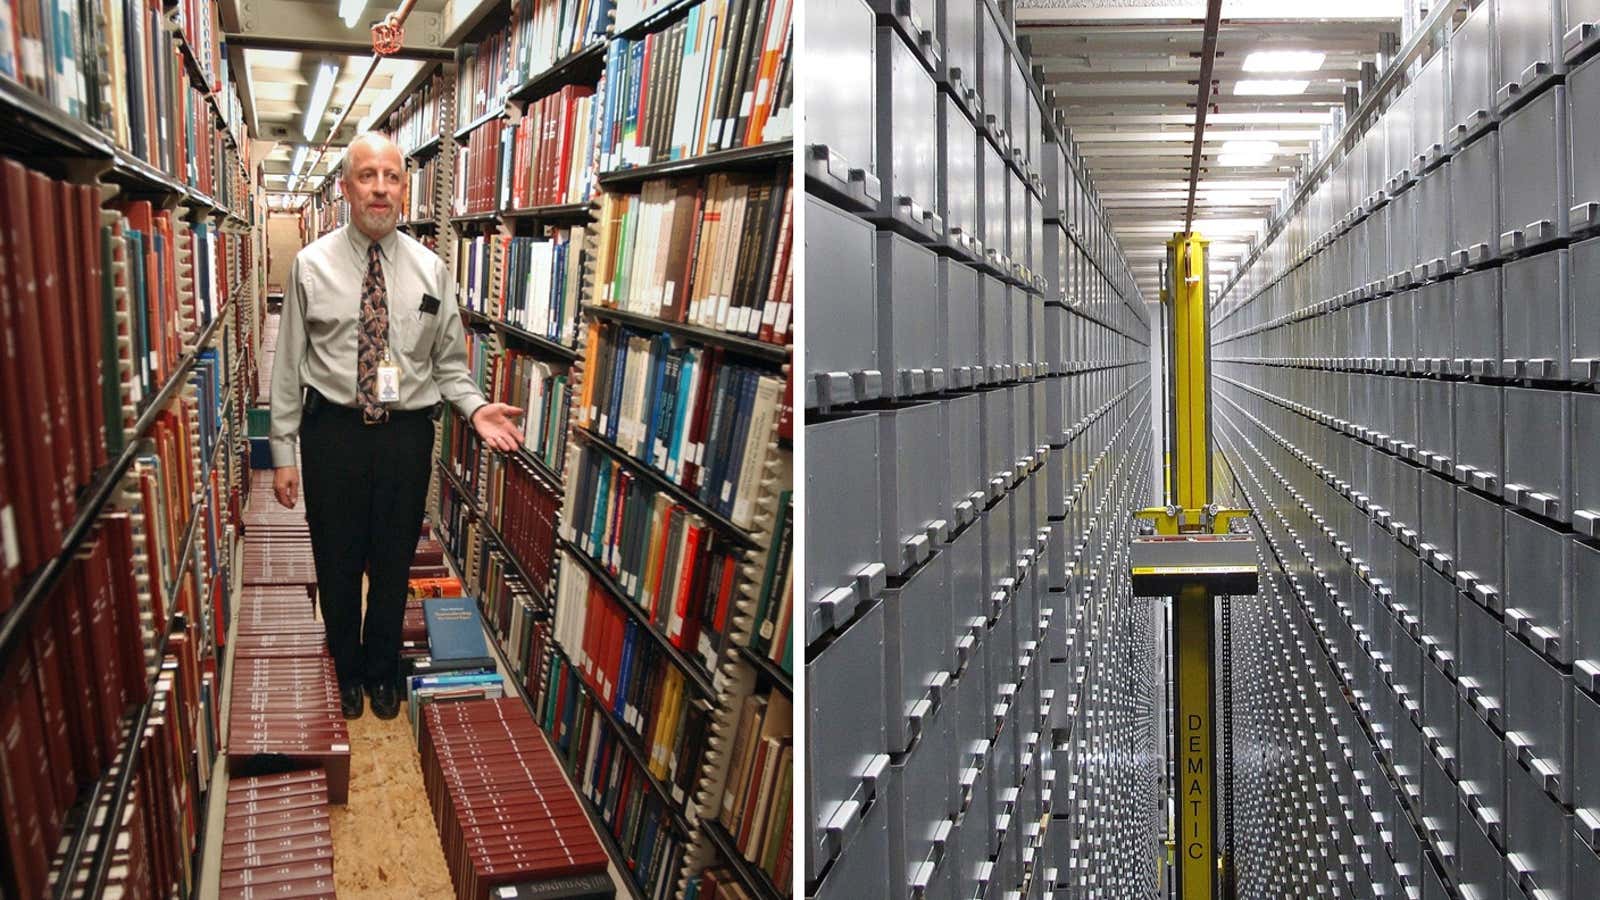 Librarians are being replaced by vast systems for automatically storing books—but it’s Wikipedia and the internet that are the real threat.